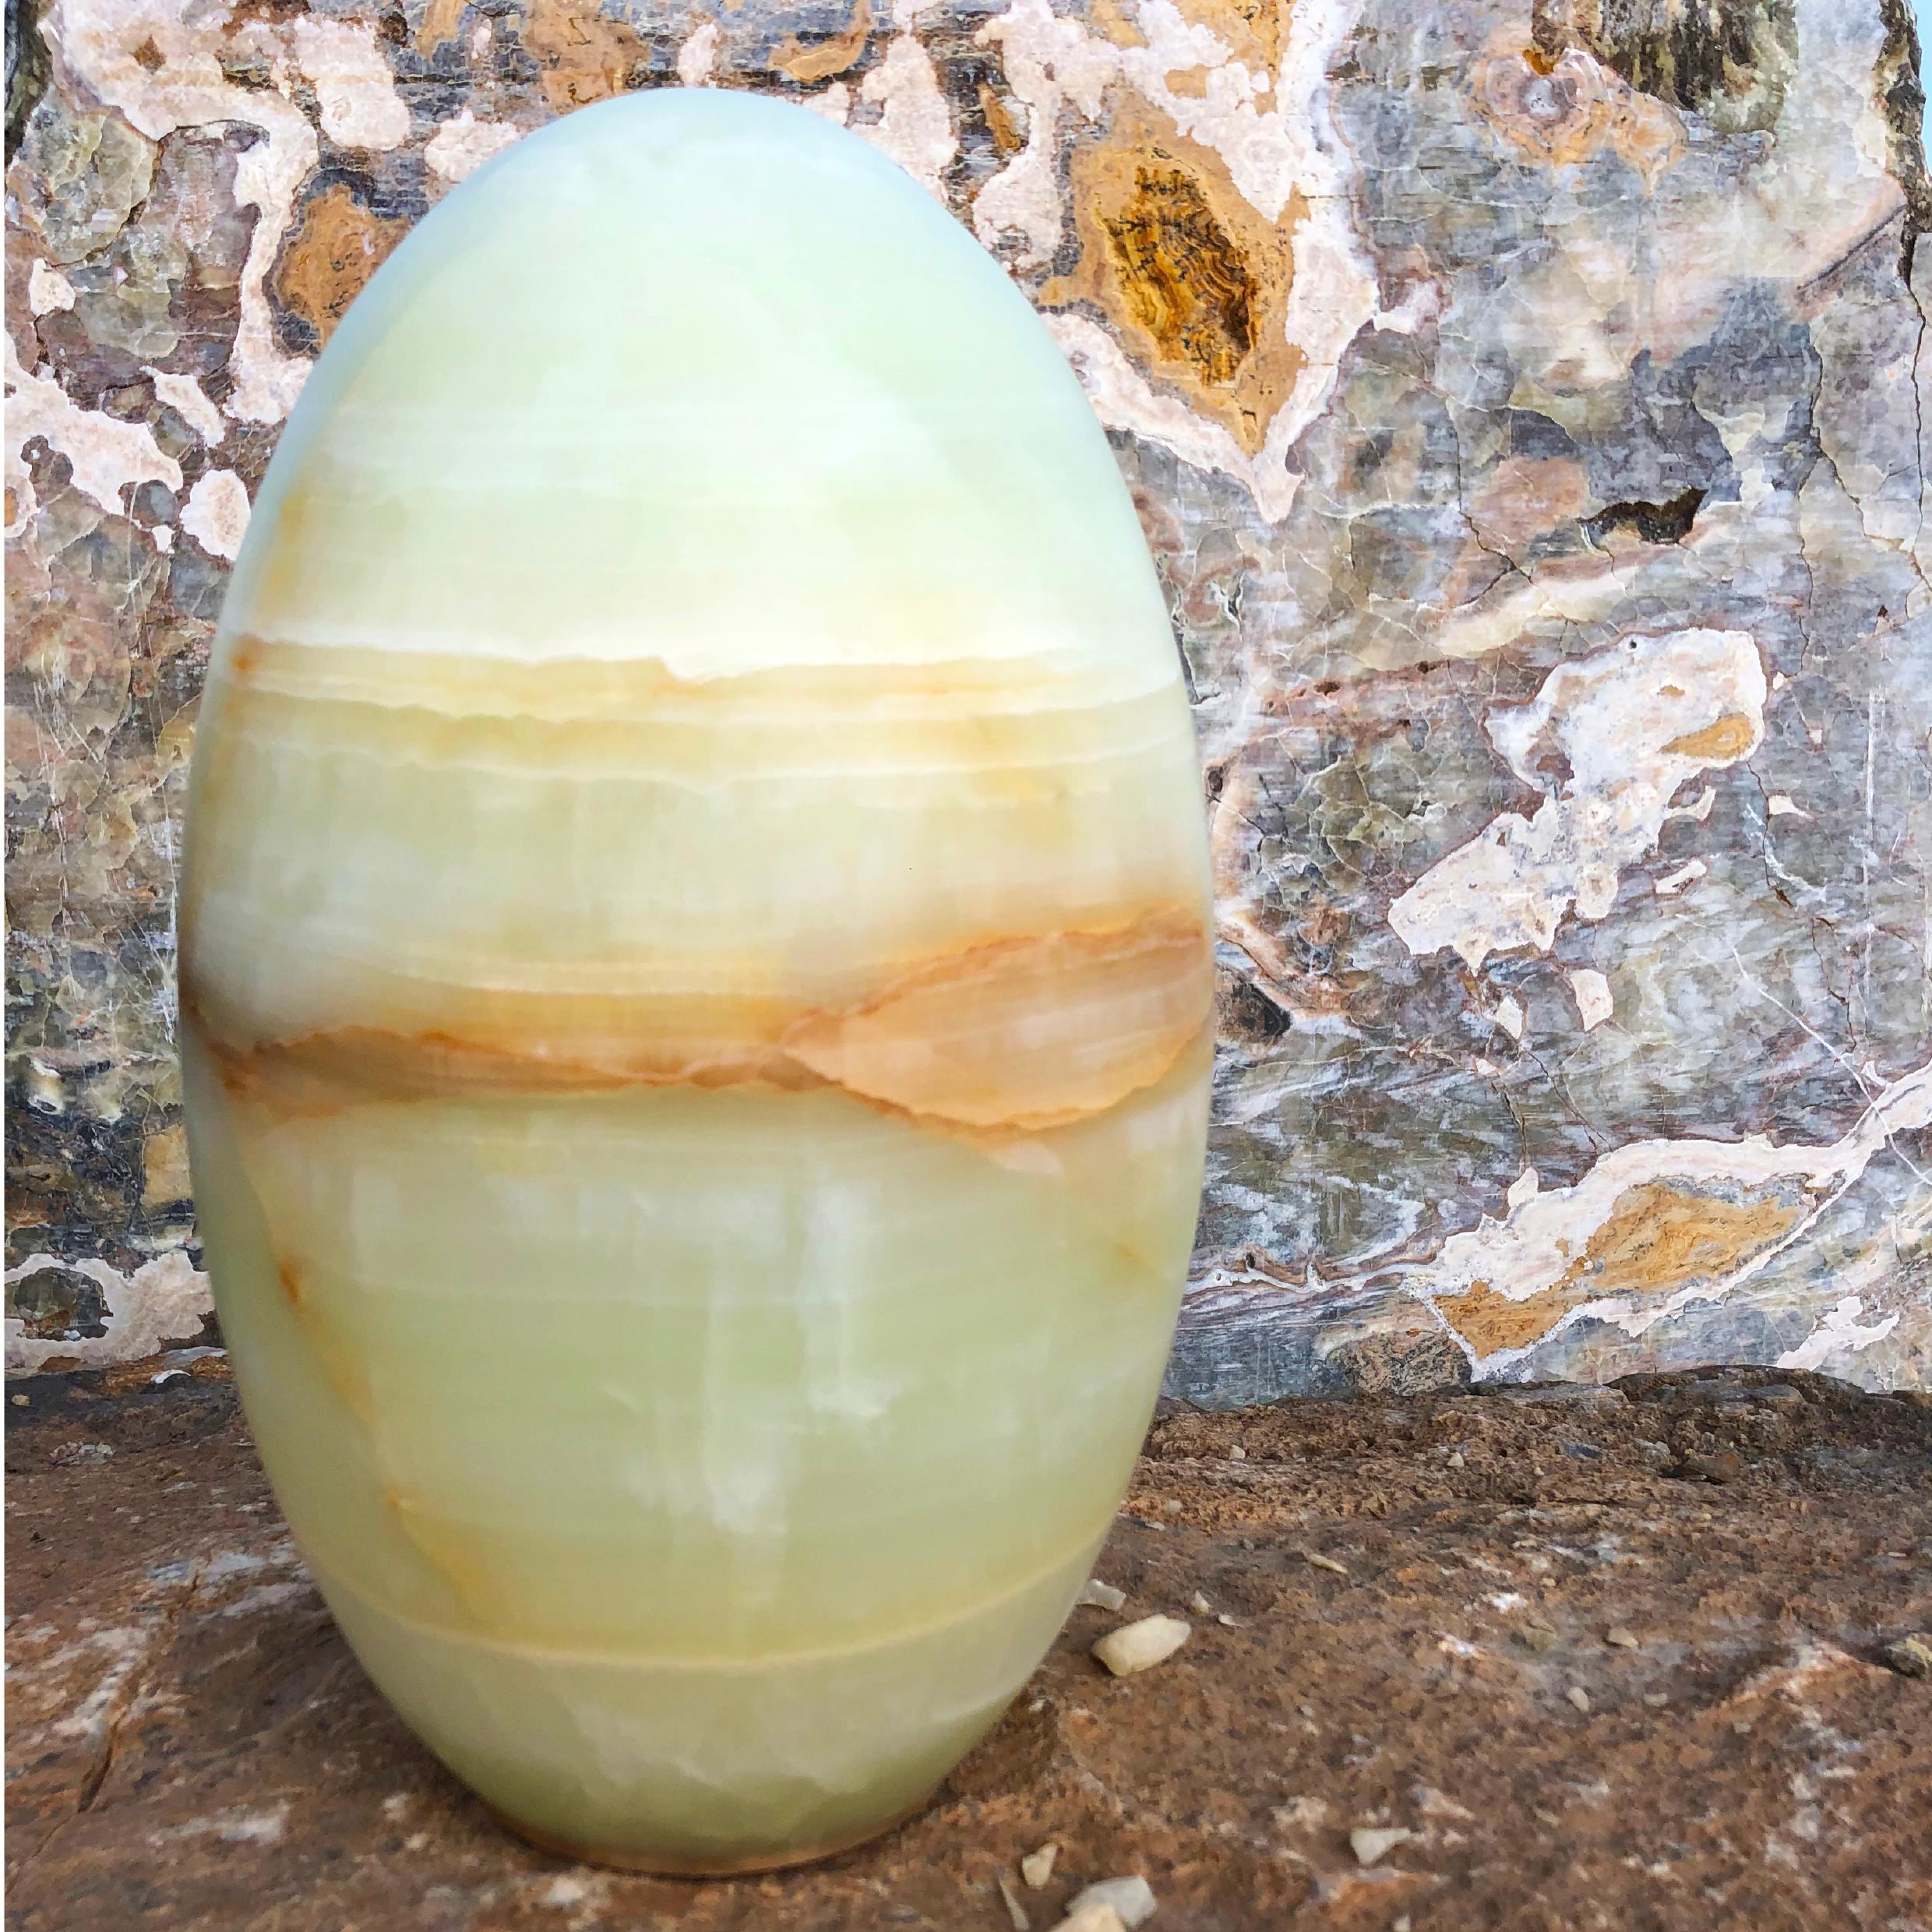 Rebirth, green onyx light sculpture by Giulia Archimede
Dimensions: D22 x H32 (Egg), D0.8 x H16 (Base) cm
Materials: Green onyx, bronze

All our lamps can be wired according to each country. If sold to the USA it will be wired for the USA for